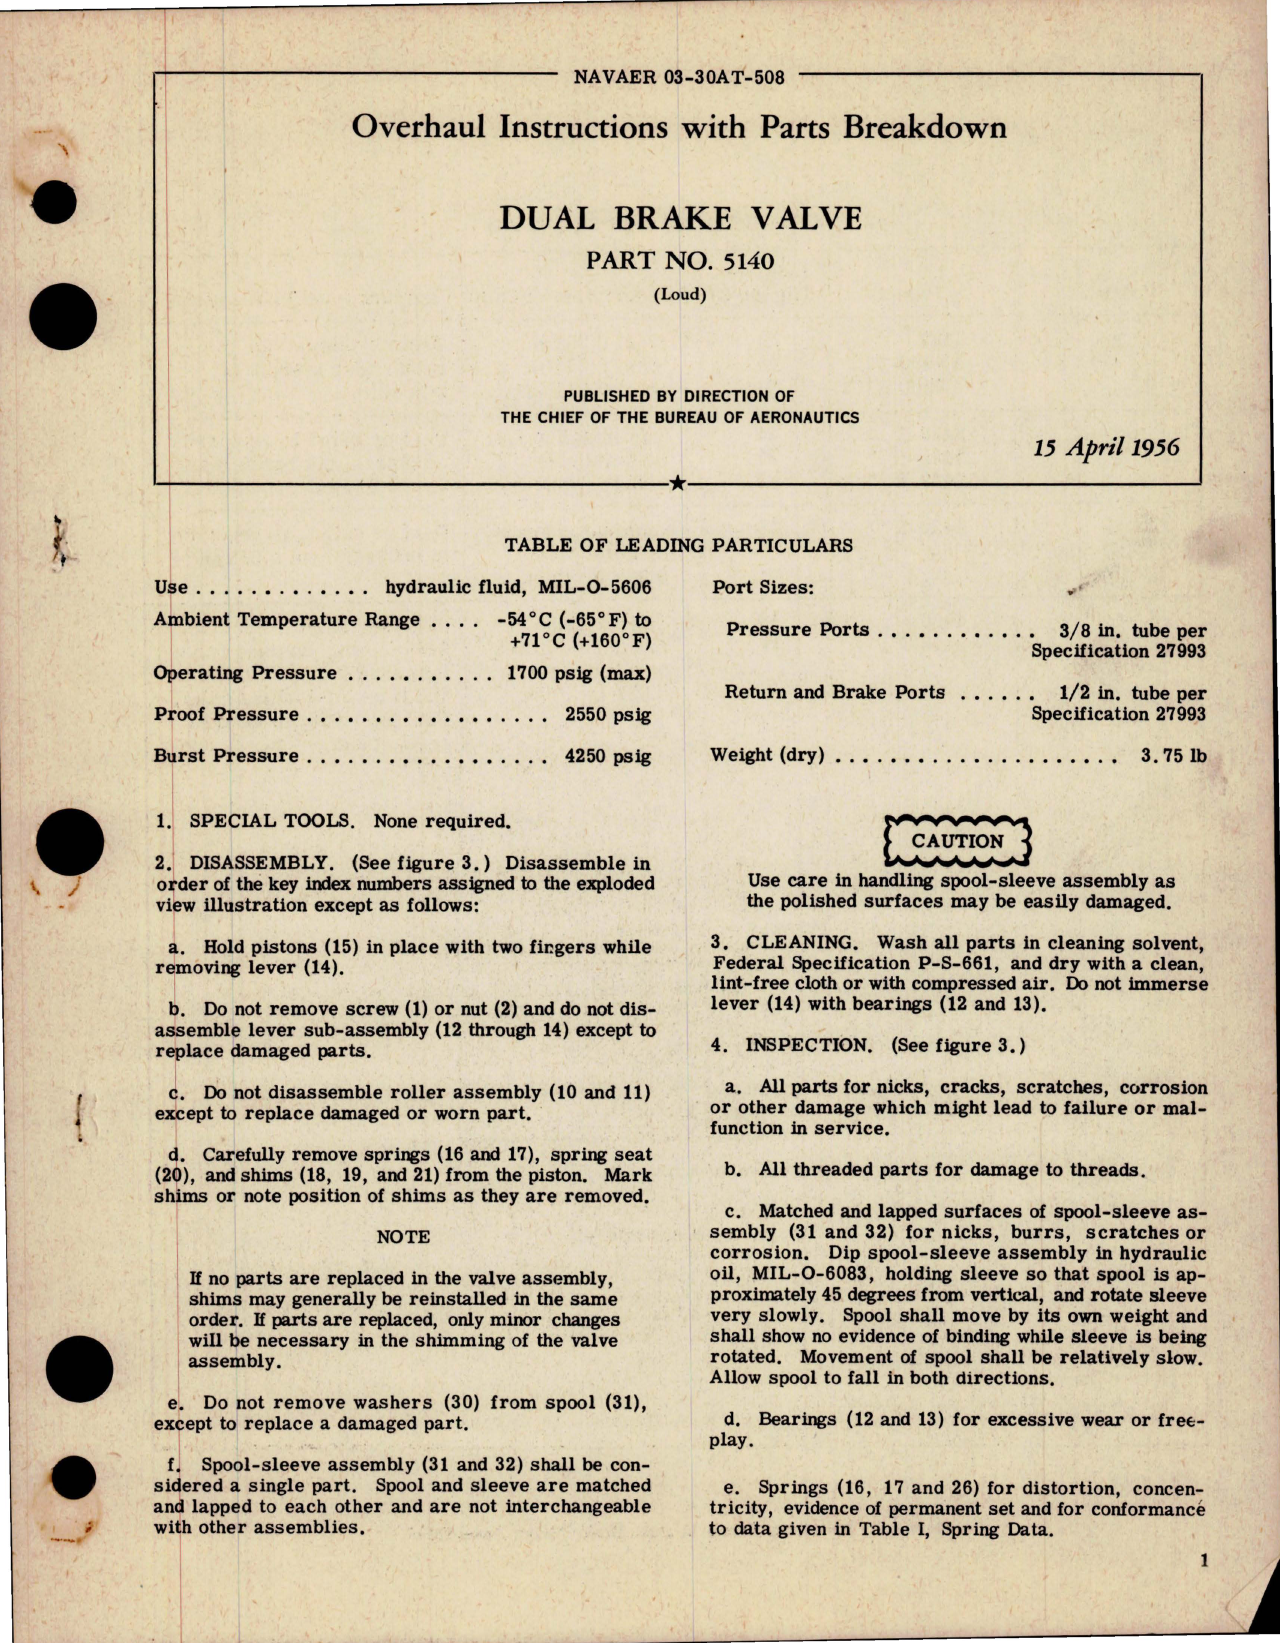 Sample page 1 from AirCorps Library document: Overhaul Instructions with Parts Breakdown for Dual Brake Valve - Part 5140 